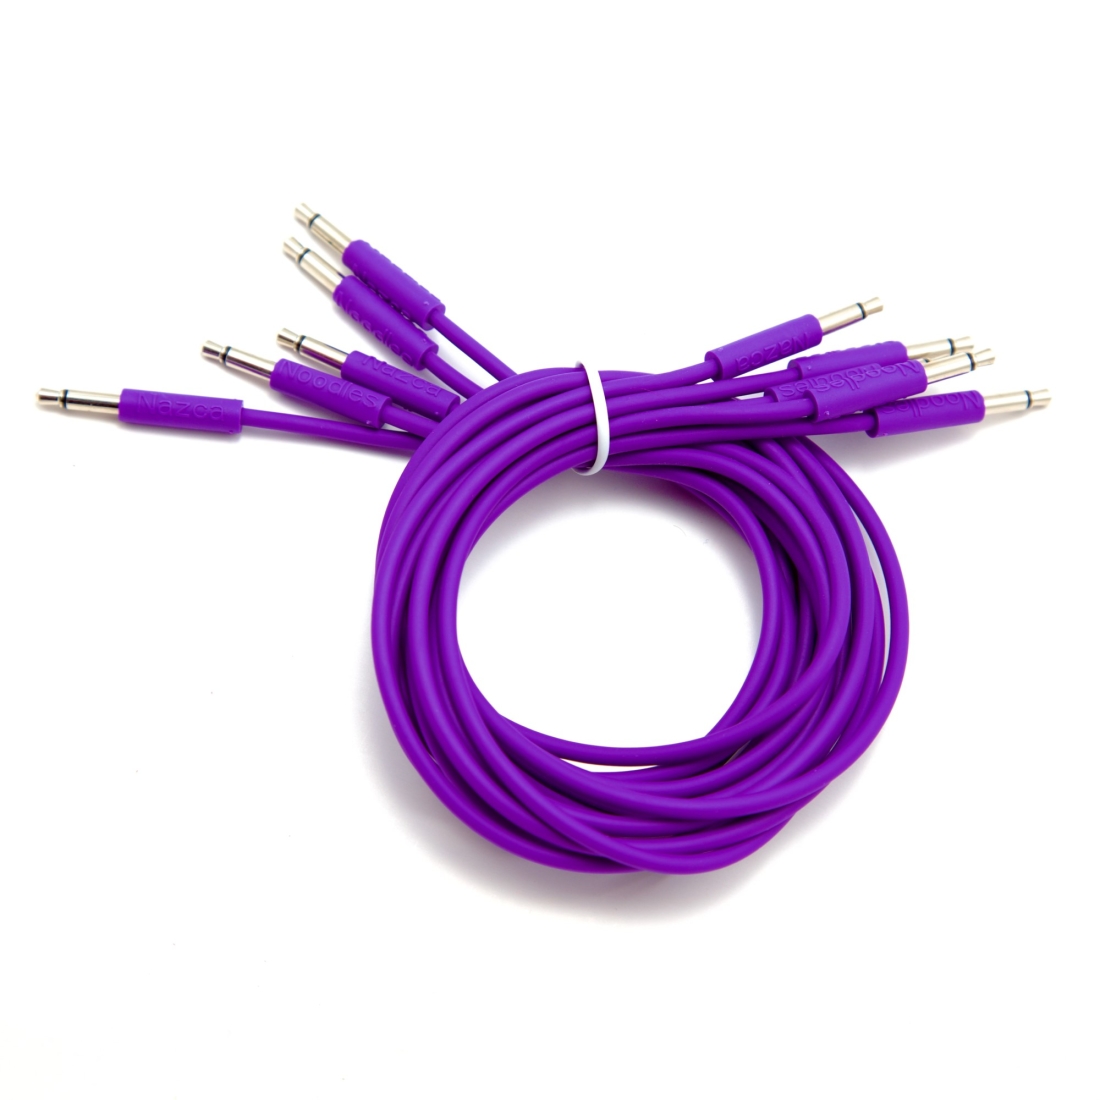 Patch Cables 3.5mm TS to 3.5mm TS - 300cm - Violet (2-Pack)